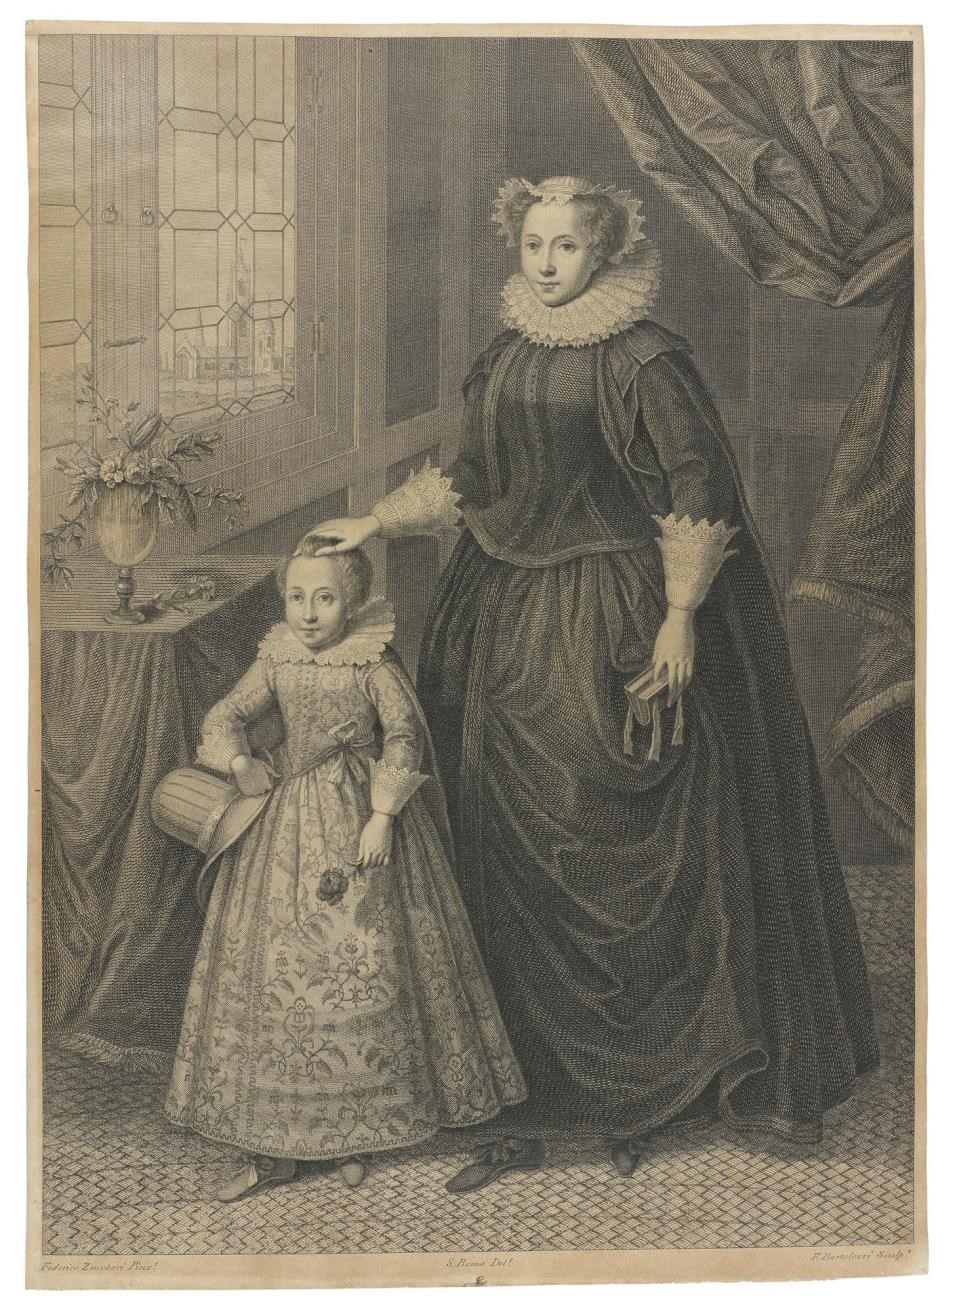 Engraving of Mary Queen of Scotland with her son (later James VI and I), after a painting by F. Zucherri, published 1779.